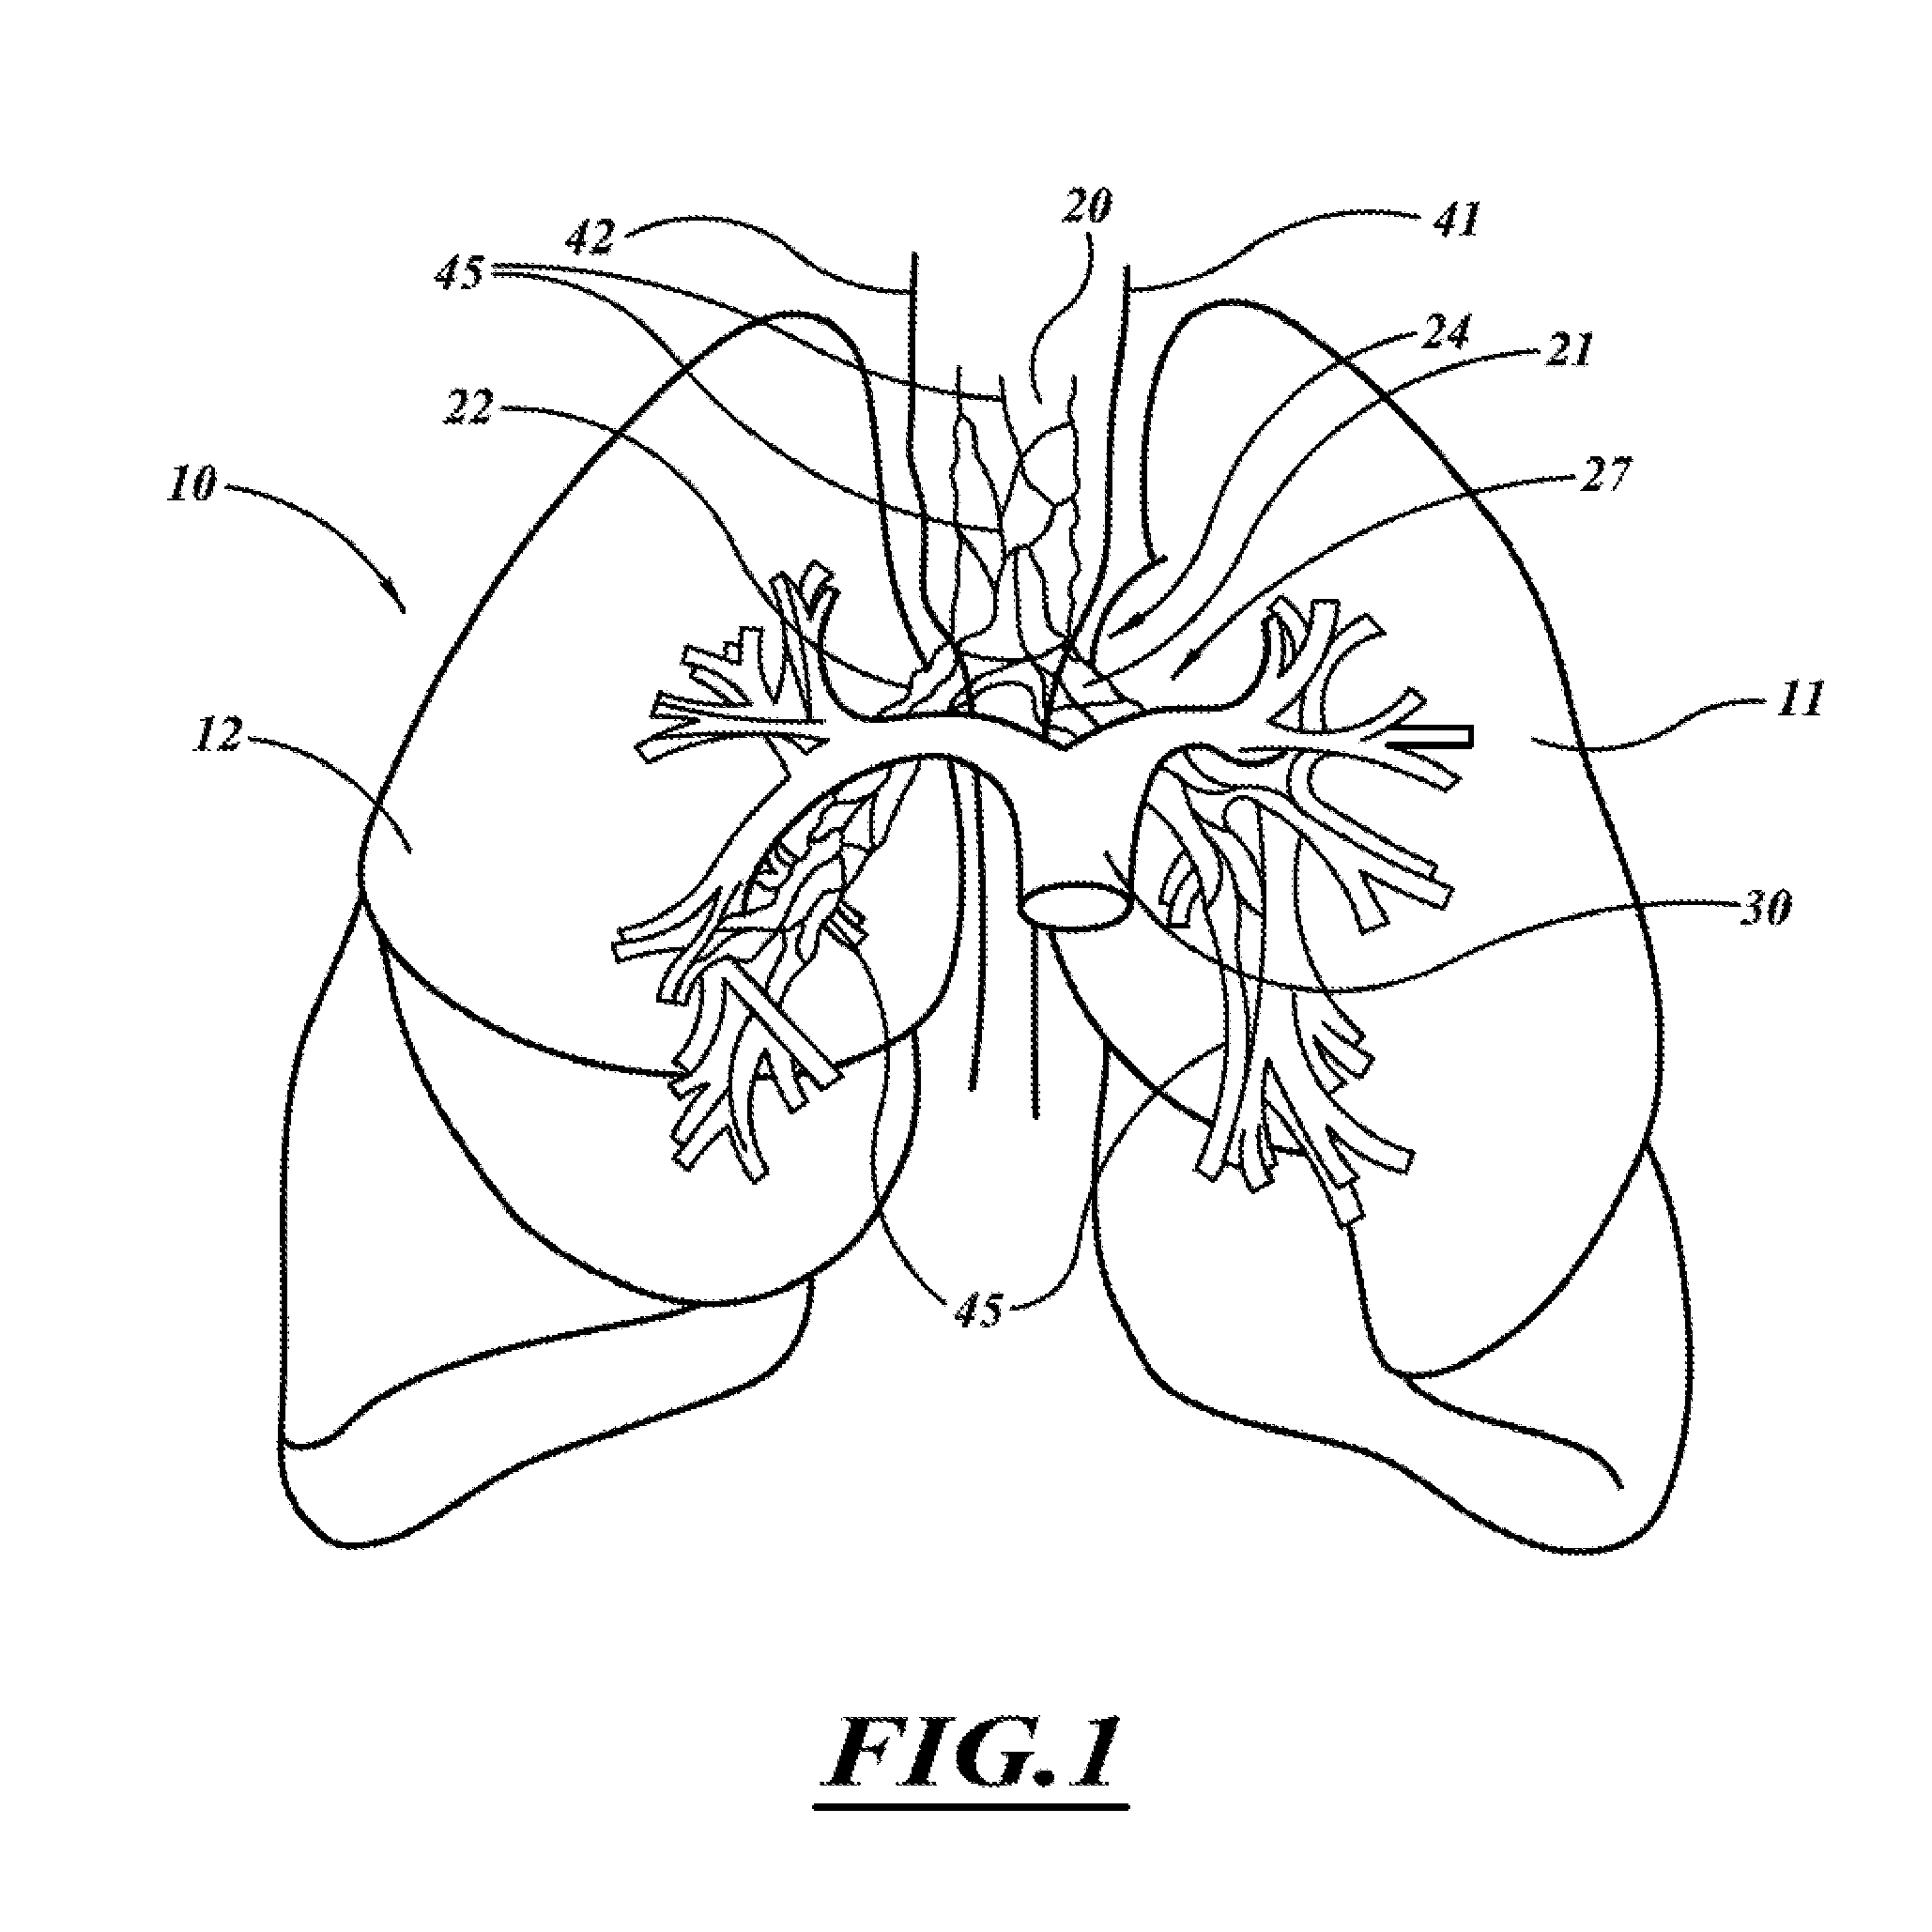 Systems, devices, and methods for treating a pulmonary disease with ultrasound energy